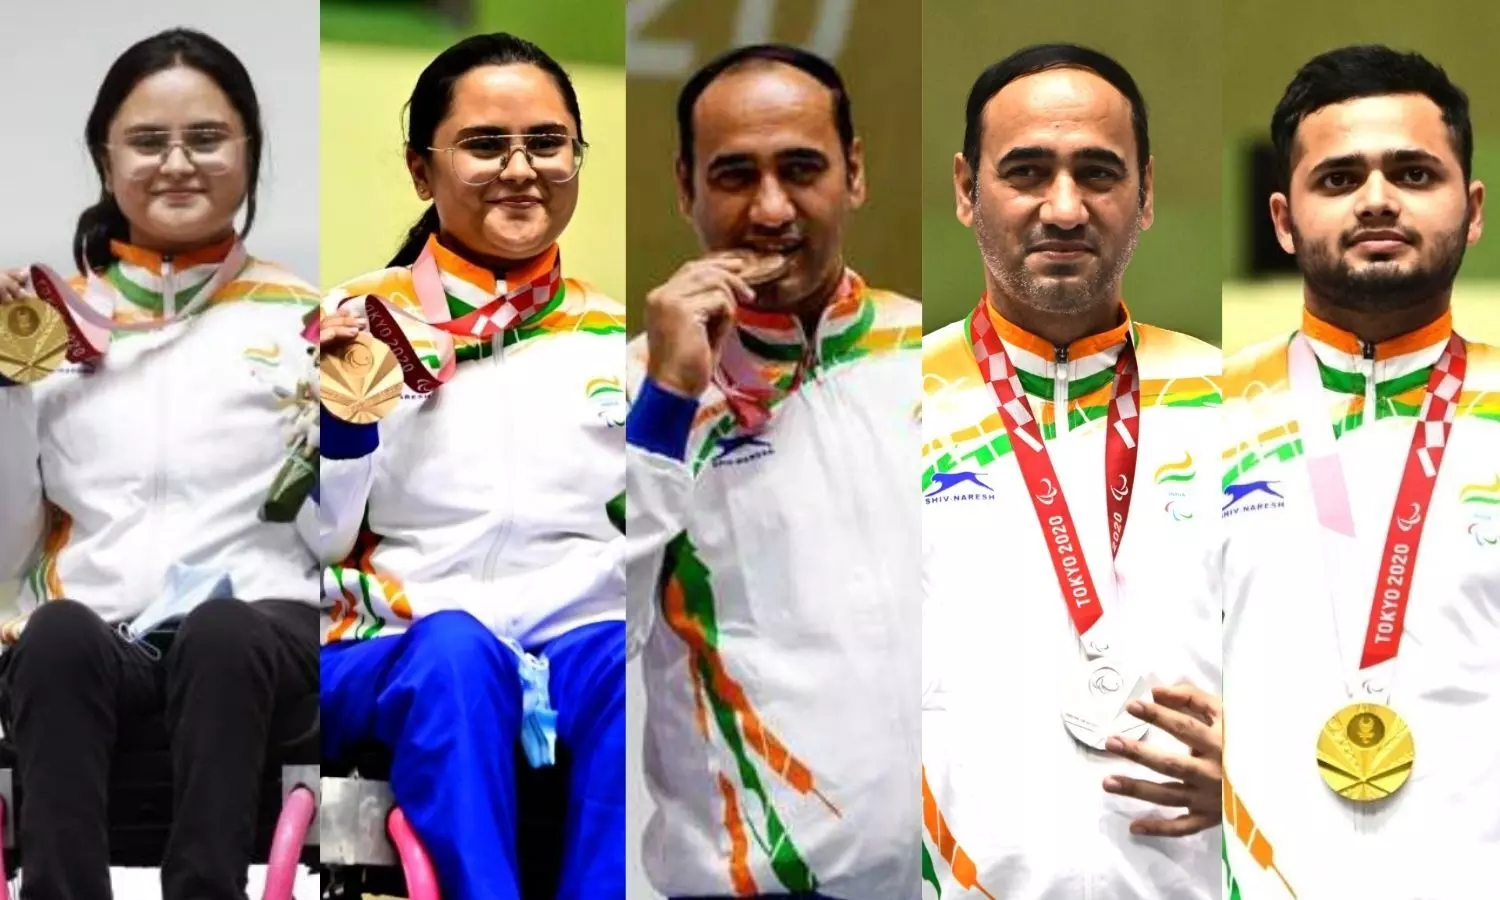 India's shooting team's performance at the Tokyo Paralympics is redemption  from Olympics